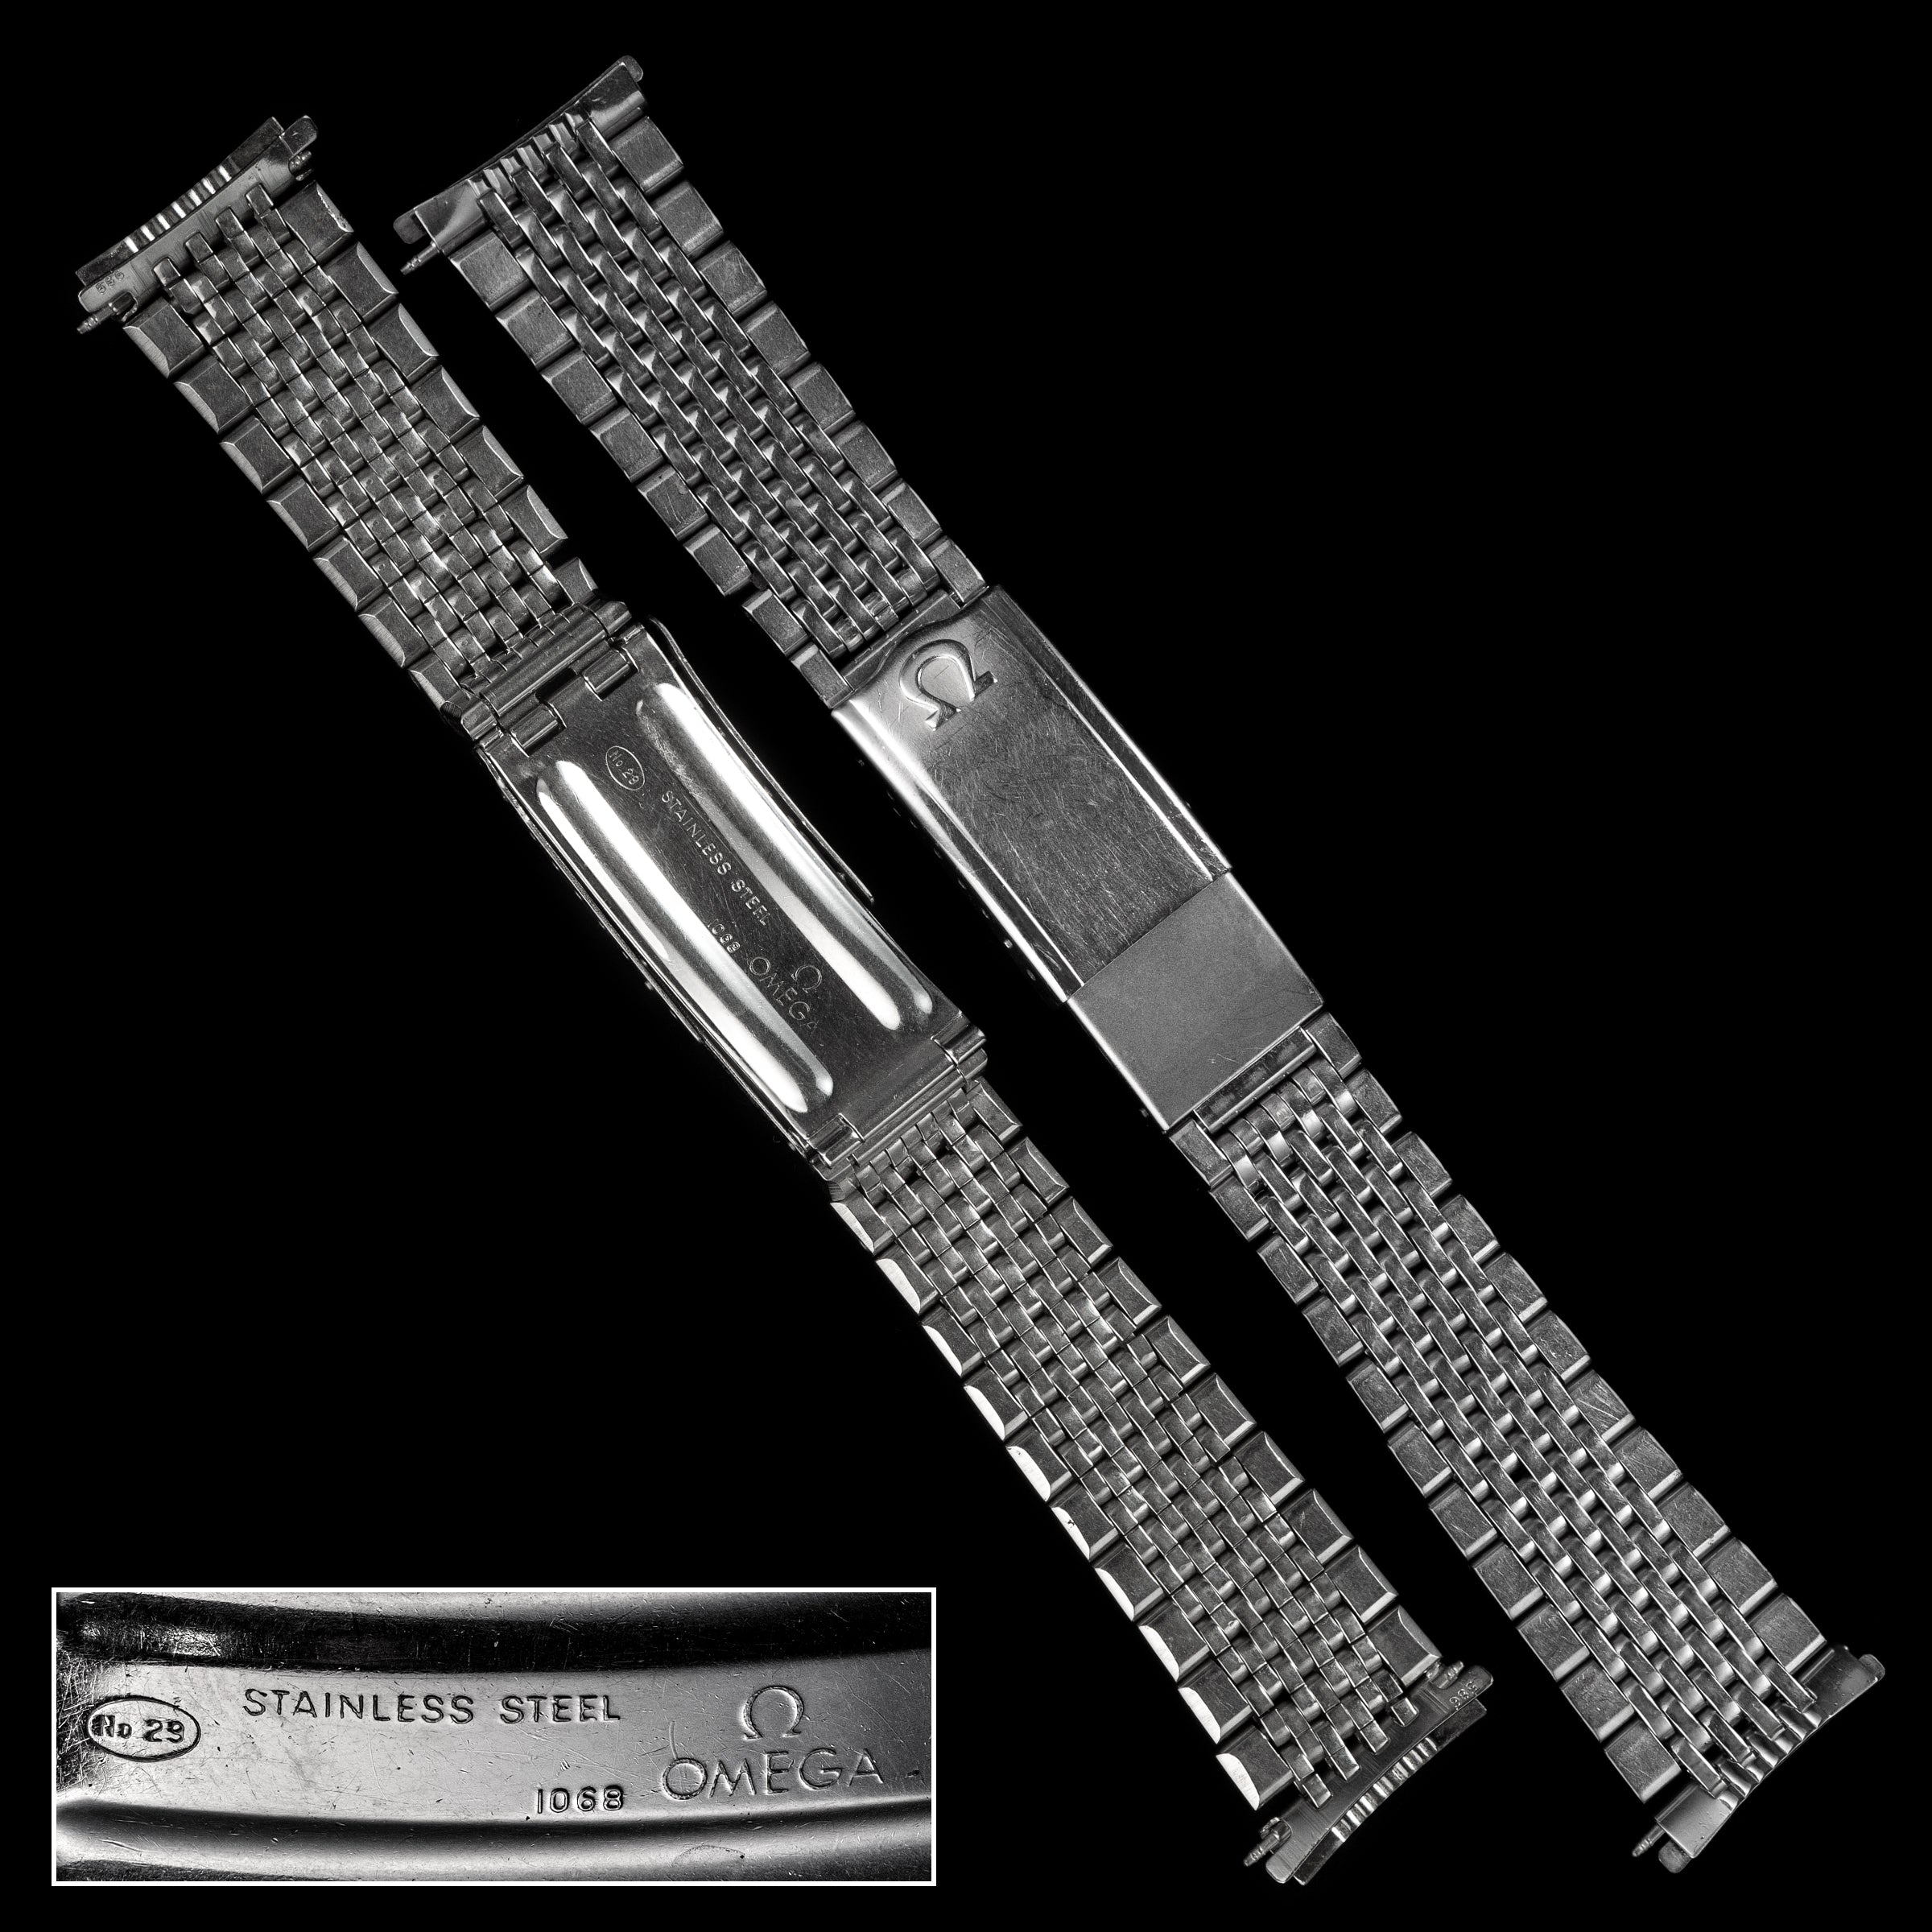 Amazon.com: Ewatchparts WATCH BAND BRACELET COMPATIBLE WITH OMEGA  SPEEDMASTER 18MM SOLID LINK STAINLESS STEEL HEAVY : Ewatchparts: Clothing,  Shoes & Jewelry